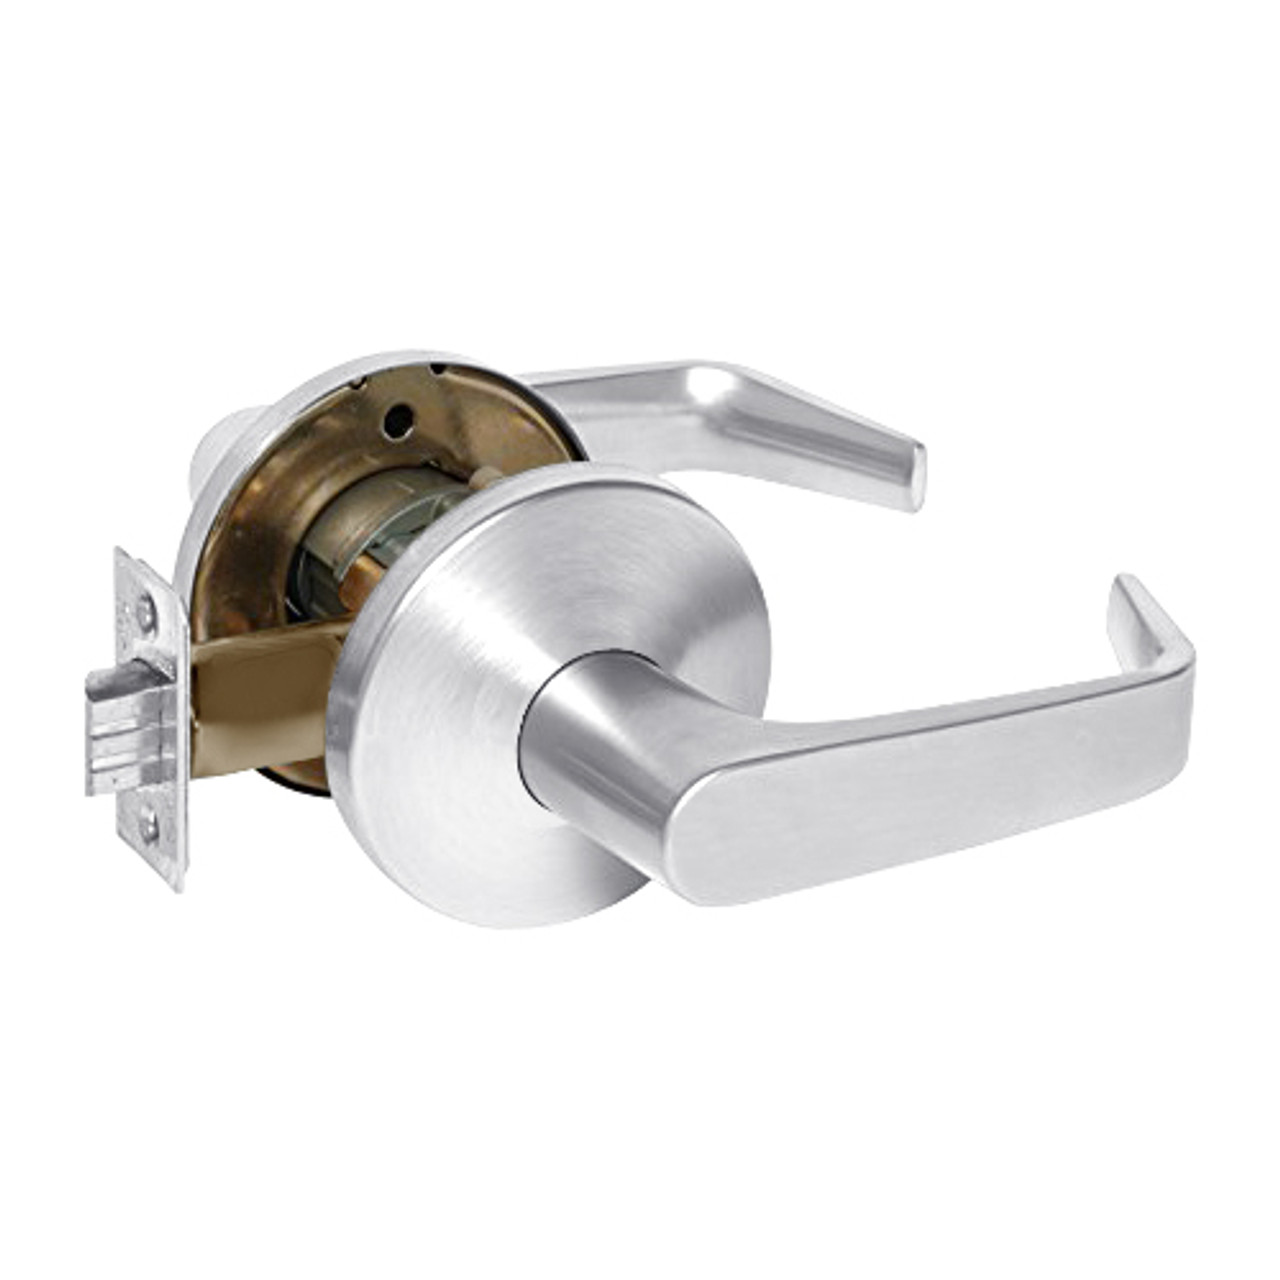 9K30NX15LS3625 Best 9K Series Passage Heavy Duty Cylindrical Lever Locks with Contour Angle with Return Lever Design in Bright Chrome